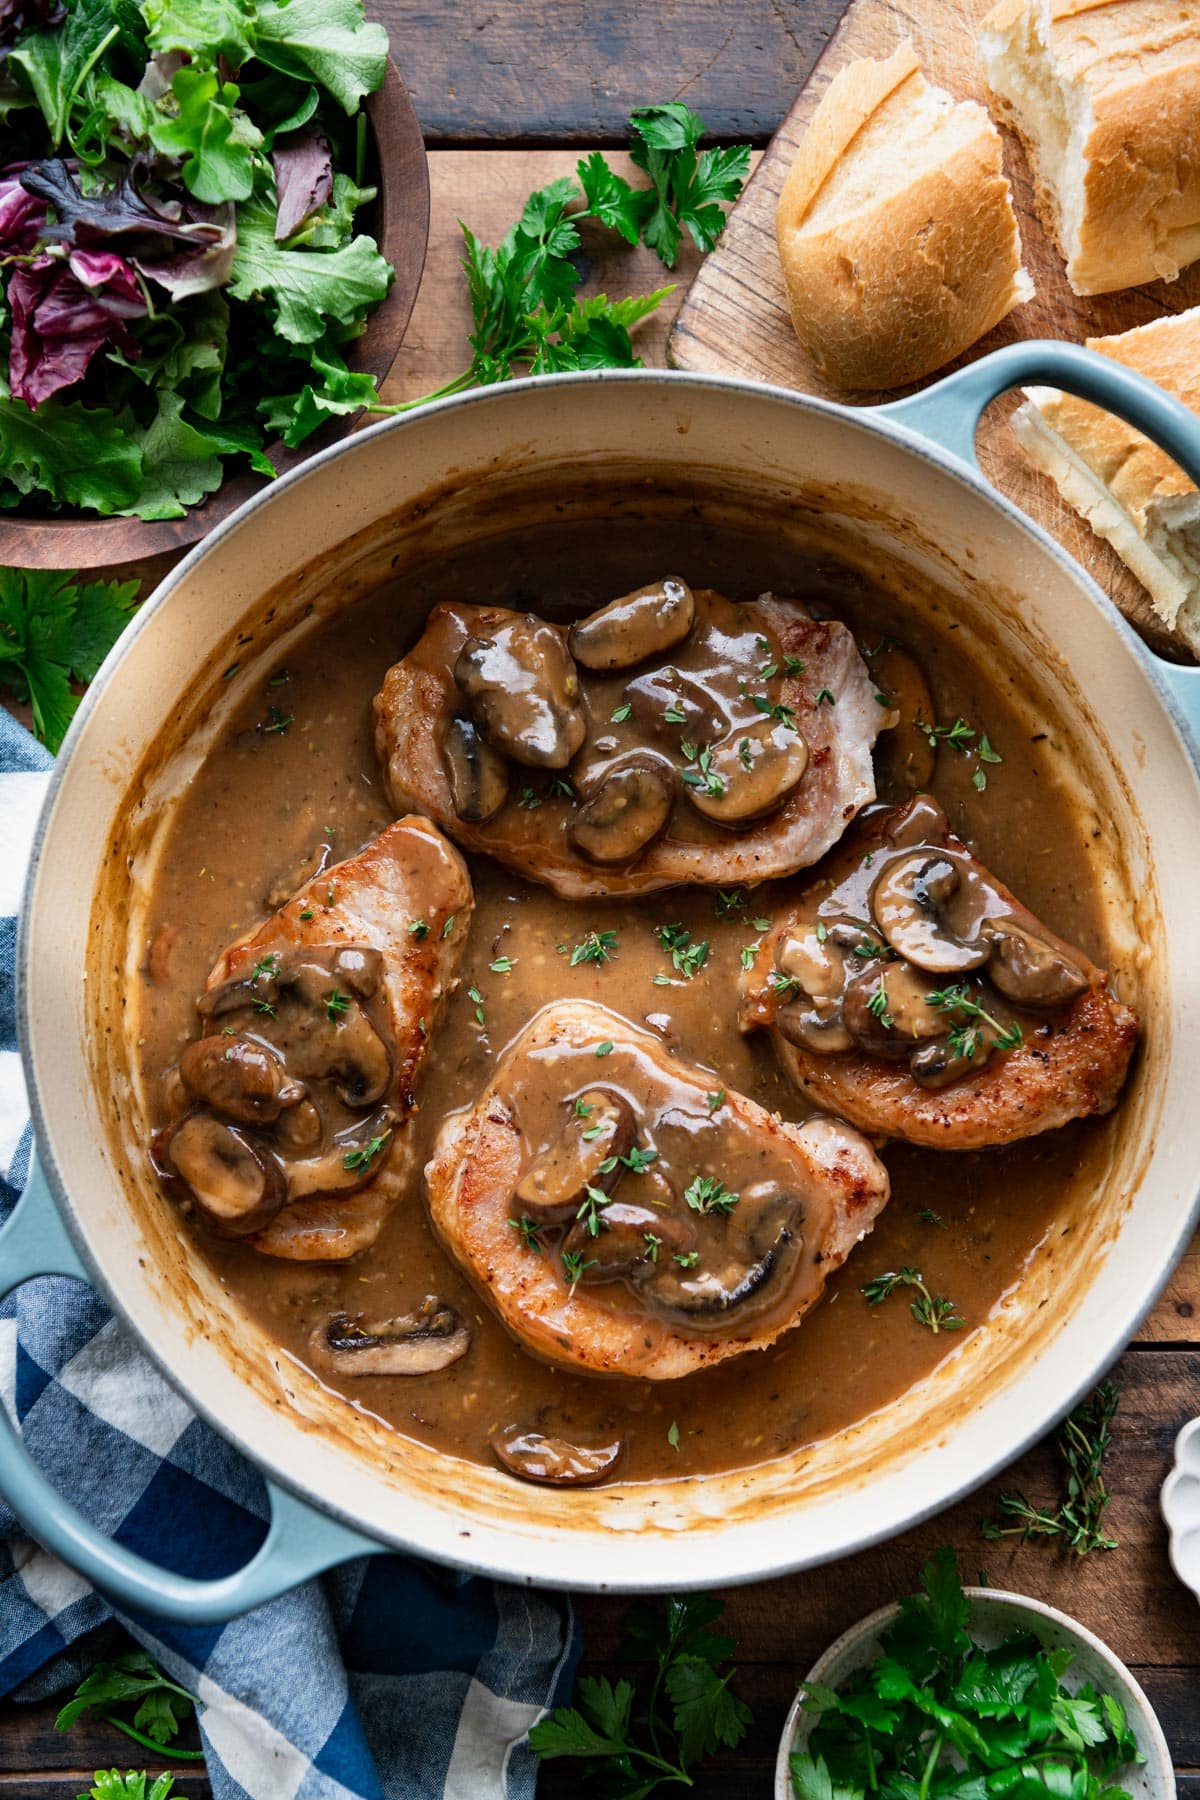 Overhead image of enamel cast iron dutch oven full of pork chops and mushroom gravy on a dinner table with salad and bread.